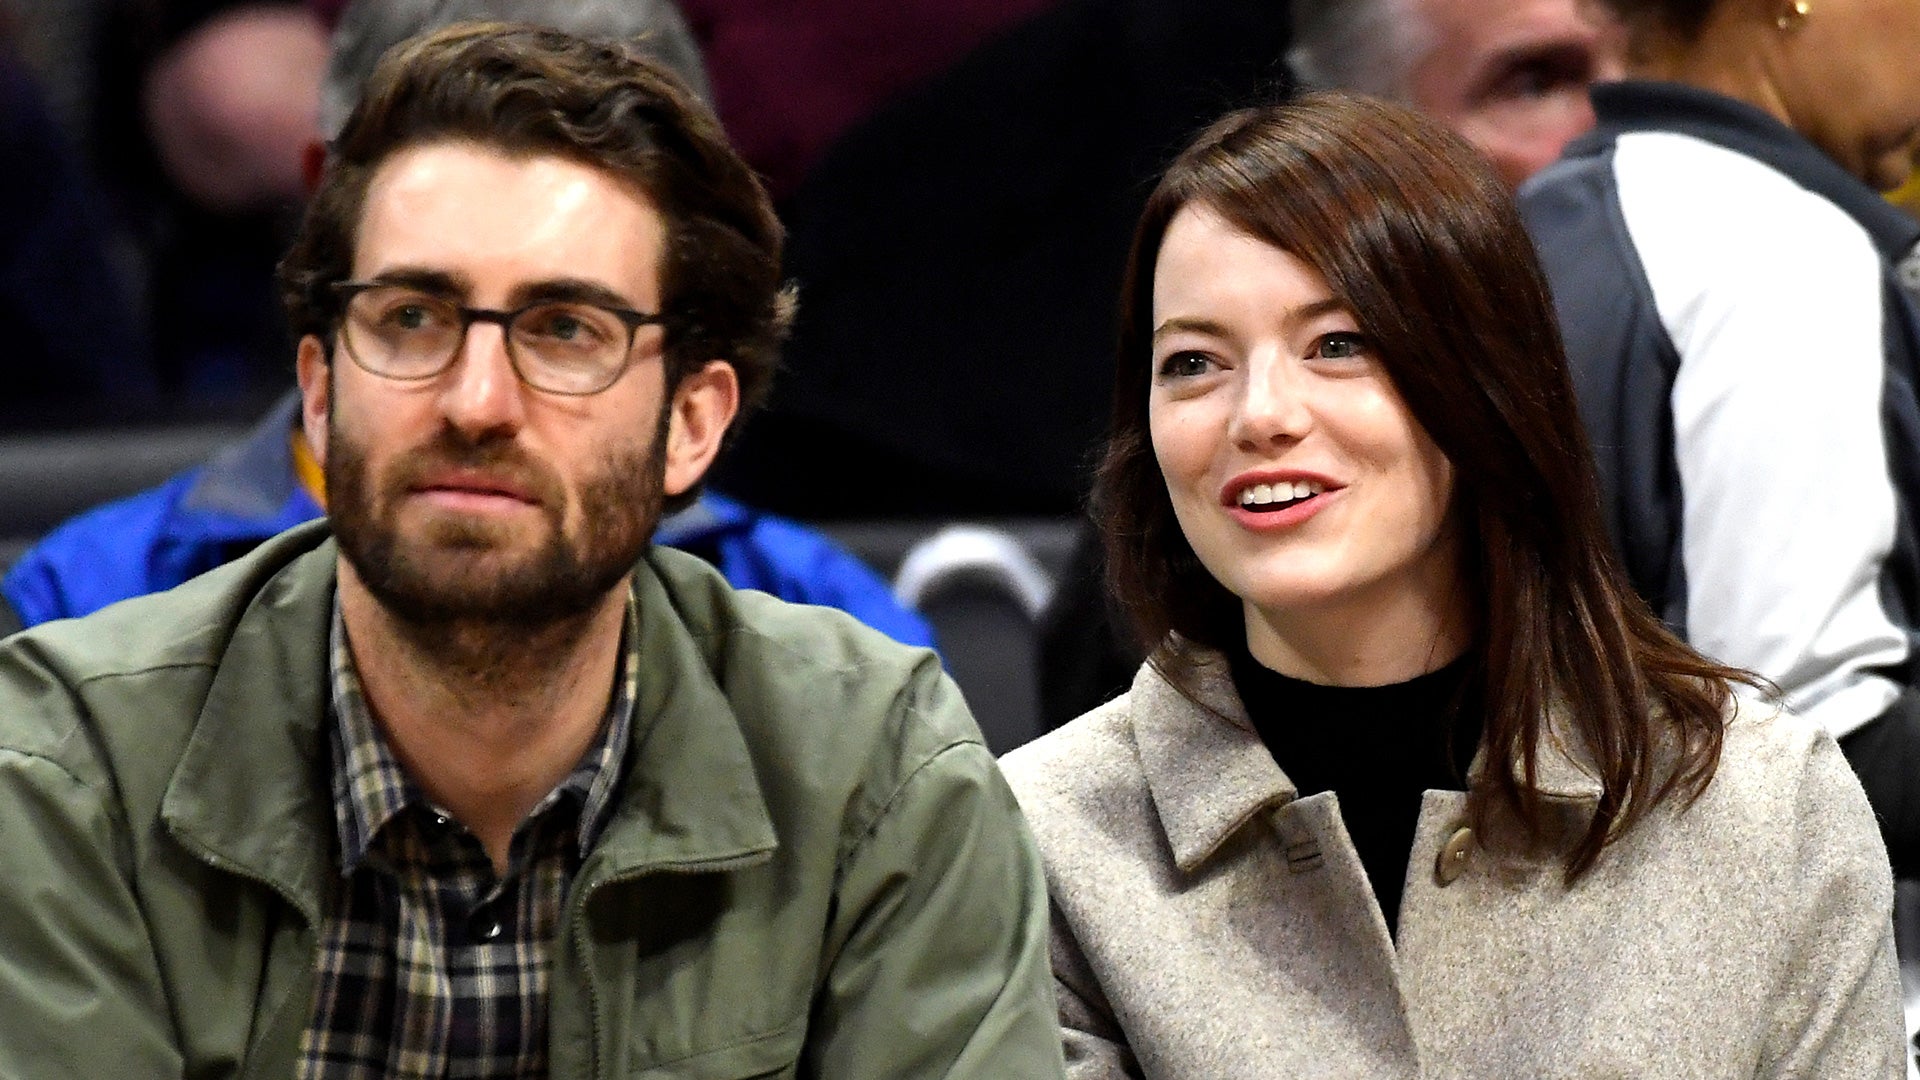 Emma Stone Booed At Mets Game For Padres Gear